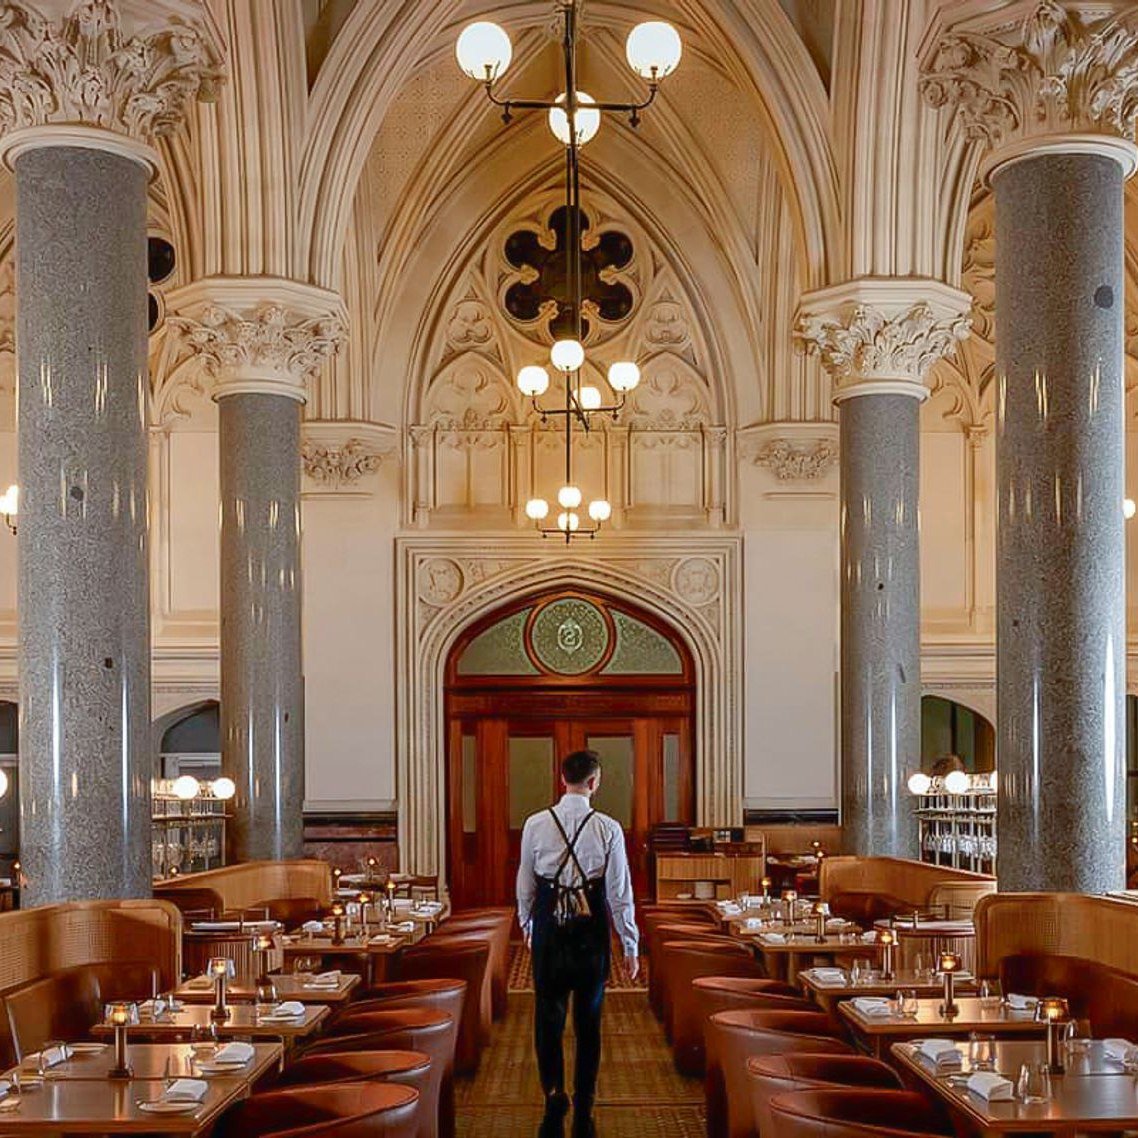 Where historic grandeur meets modern hospitality at Reine &amp; La Rue! The Nomad Group owns restaurants across Australia and, in their latest challenge, needed an audio system that would not compromise the breathtaking architecture dating back to 18